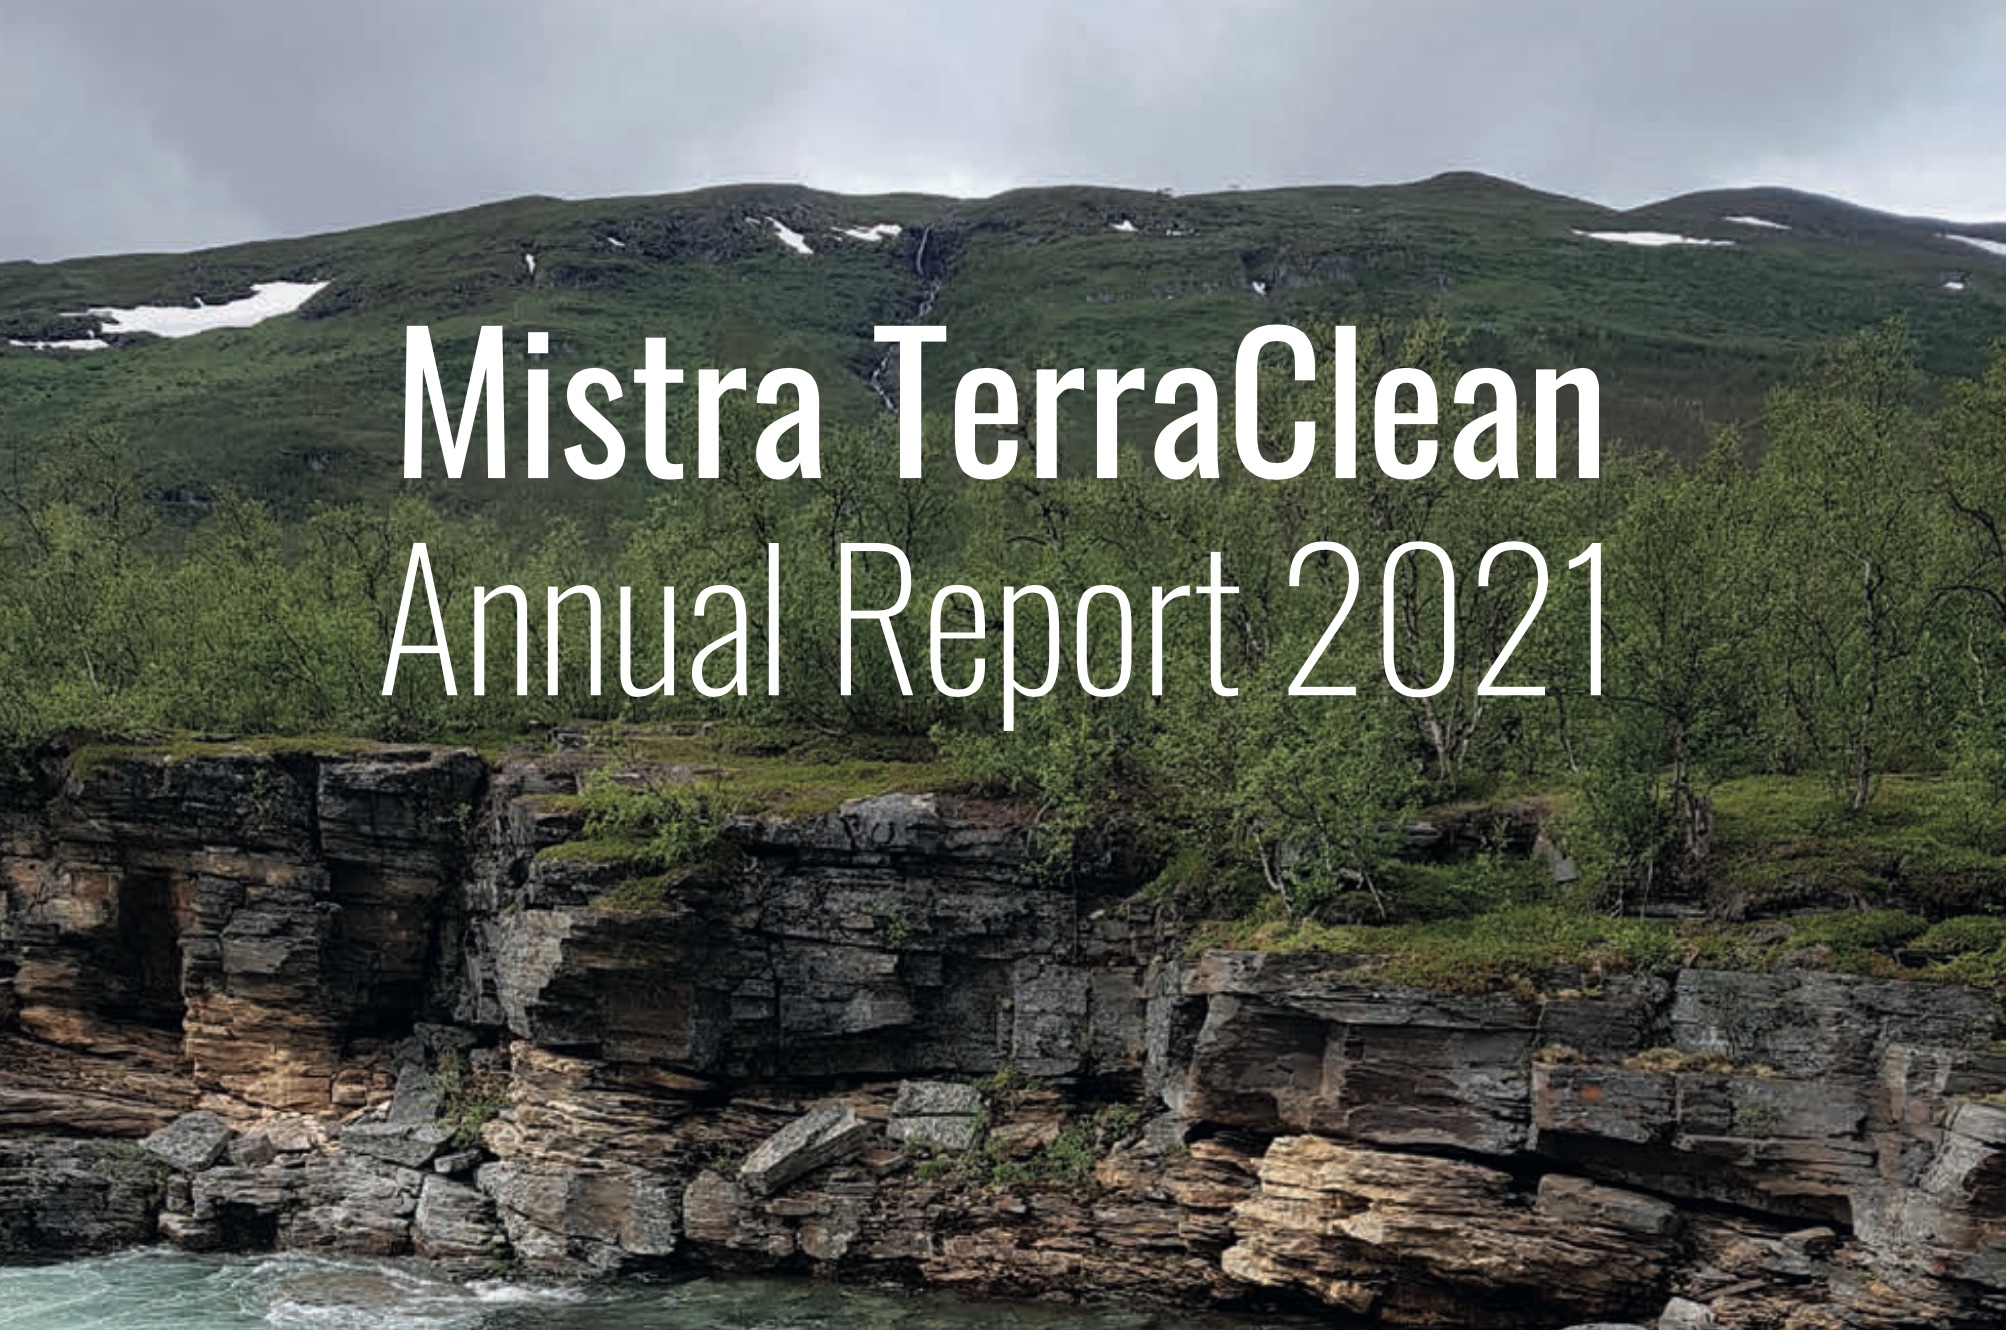 Annual Report 2021 – Many milestones reached with a multidisciplinary approach